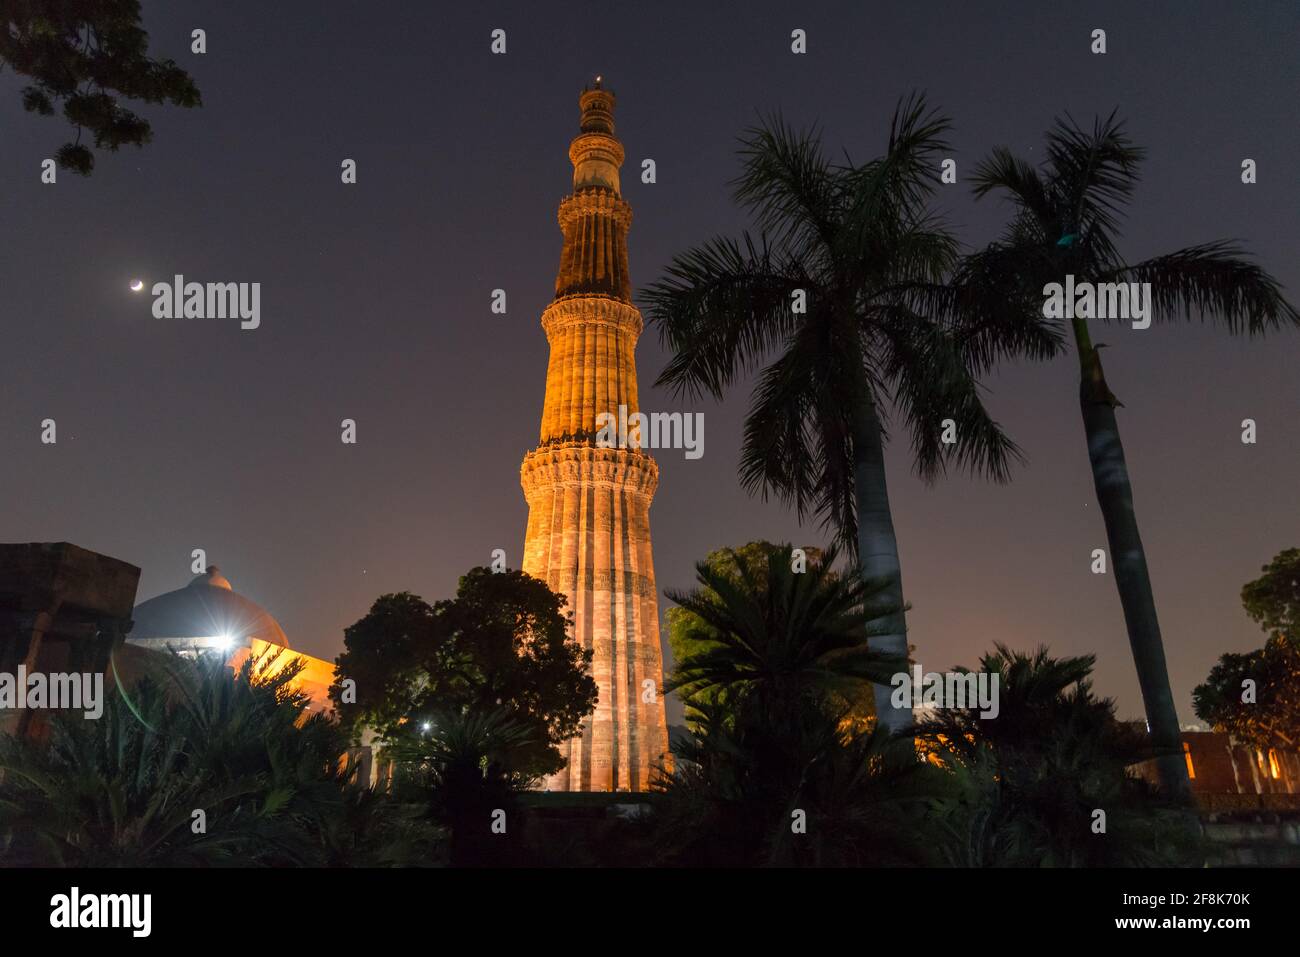 Silhouette of Qutub Minar a highest minaret in India standing 73 m tall tapering tower of five storeys made of red sandstone. It is UNESCO world herit Stock Photo